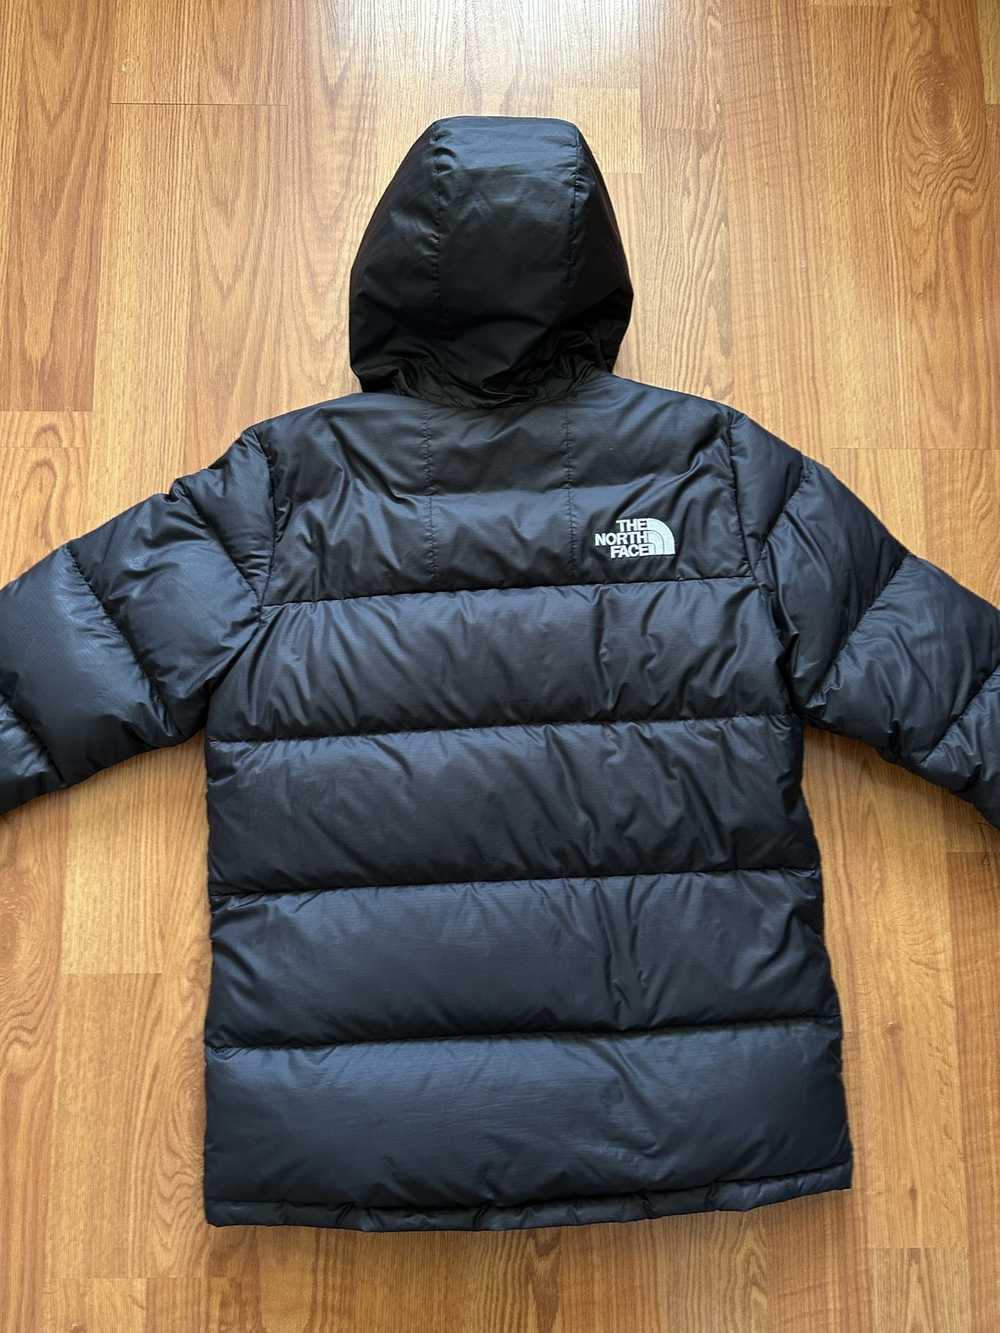 The North Face The North Face Himalayan Parka - image 2